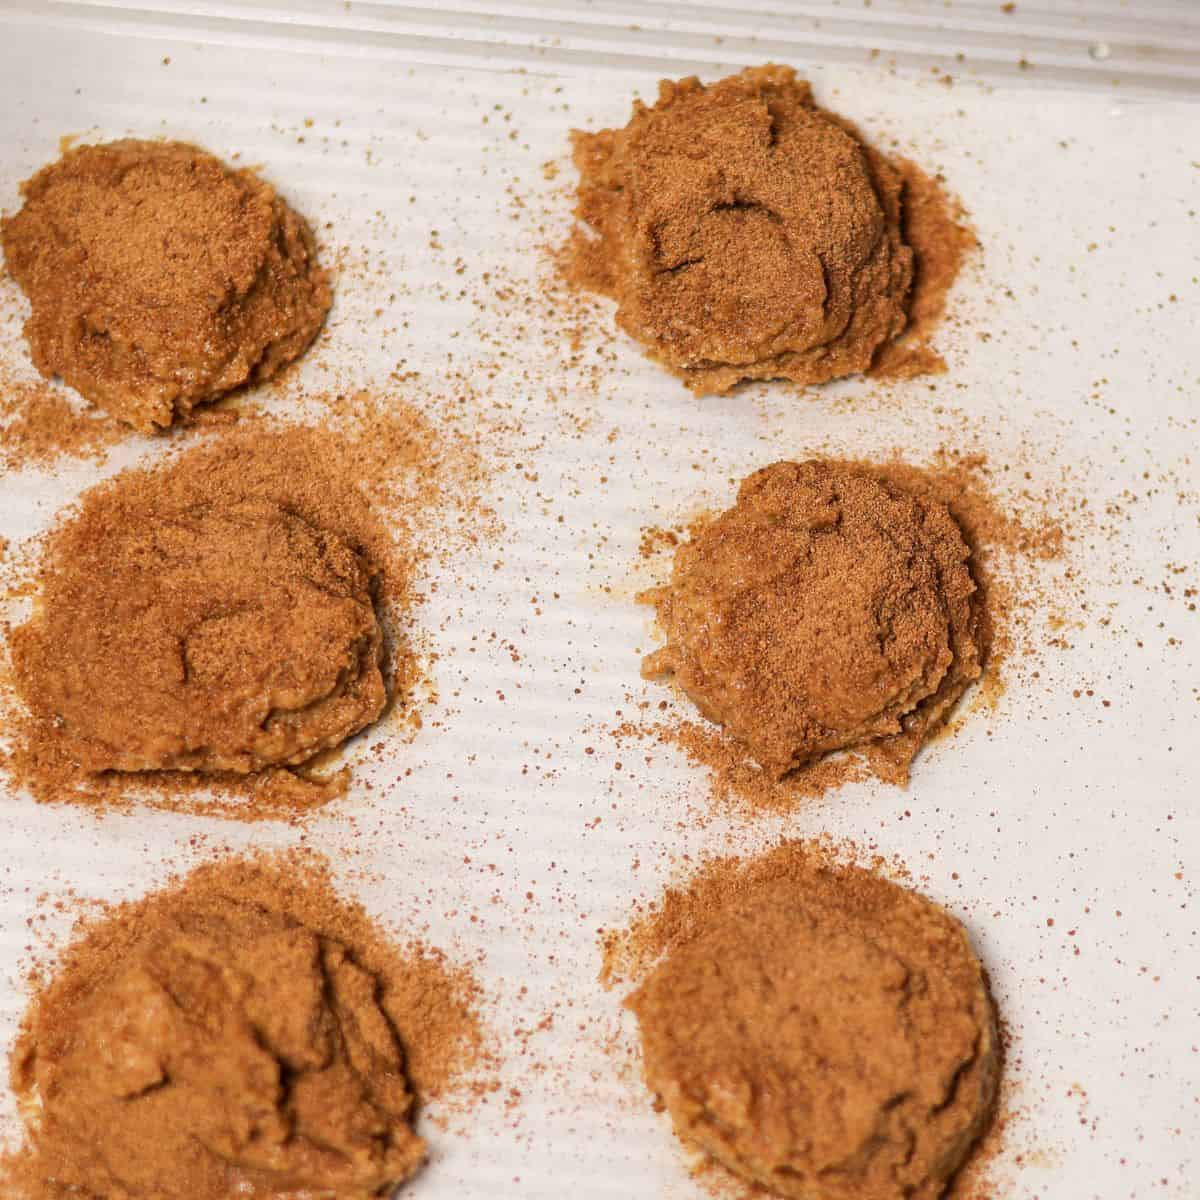 Portions of snickerdoodle cookie dough on a parchment-lined baking sheet, each sprinkled with a cinnamon and sugar mix.